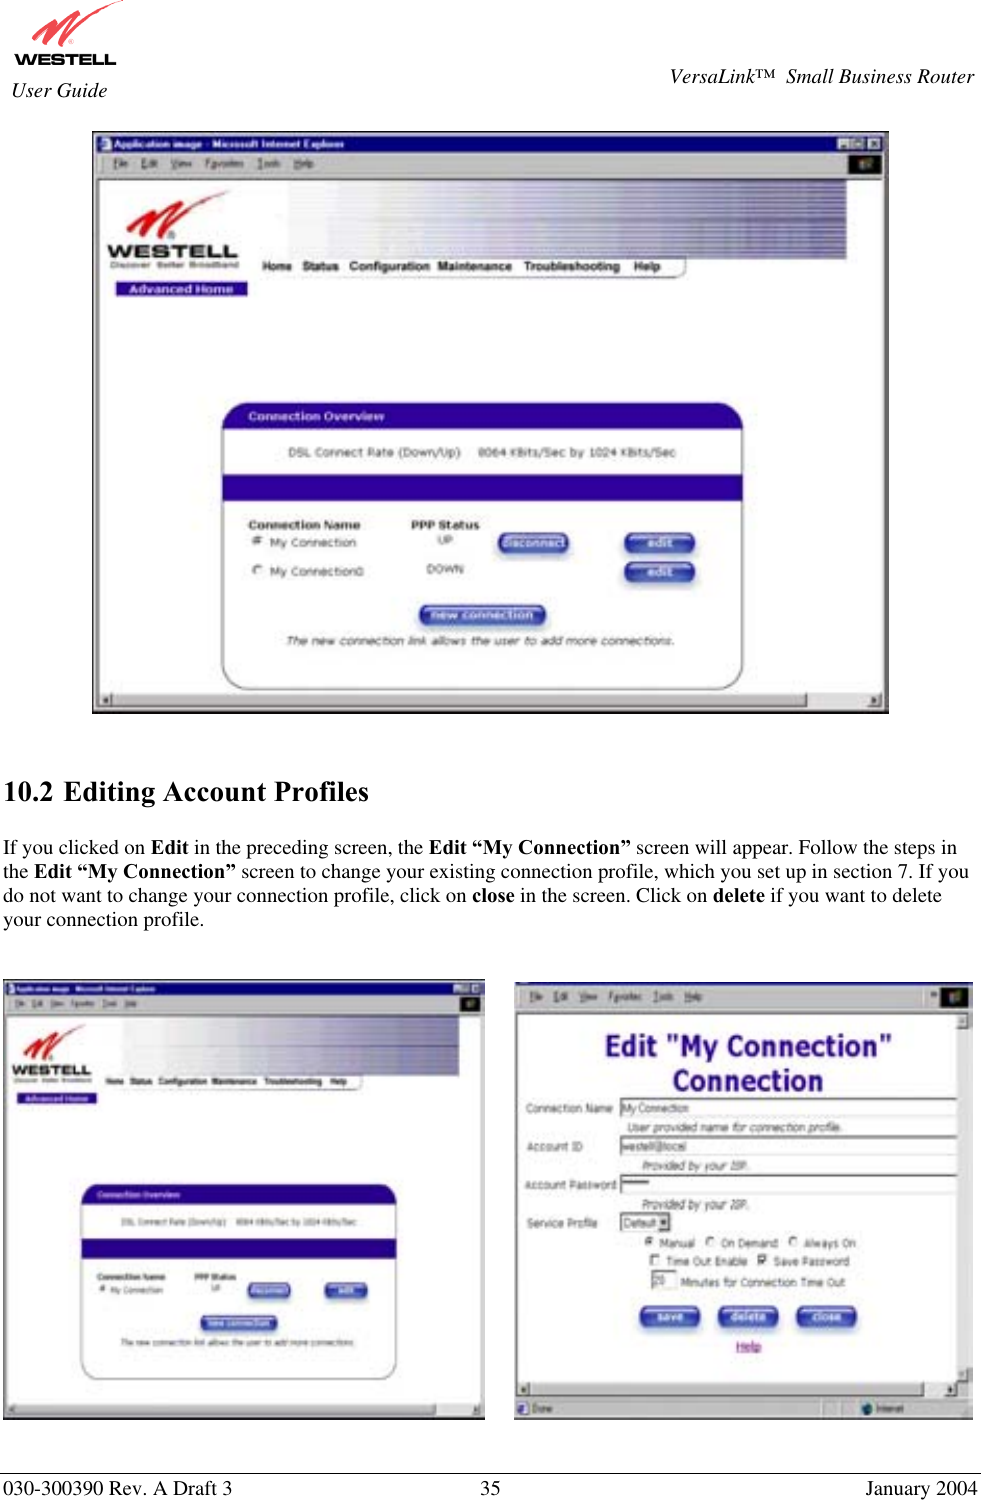       030-300390 Rev. A Draft 3  35  January 2004  VersaLink™  Small Business Router  User Guide    10.2 Editing Account Profiles  If you clicked on Edit in the preceding screen, the Edit “My Connection” screen will appear. Follow the steps in the Edit “My Connection” screen to change your existing connection profile, which you set up in section 7. If you do not want to change your connection profile, click on close in the screen. Click on delete if you want to delete your connection profile.                 